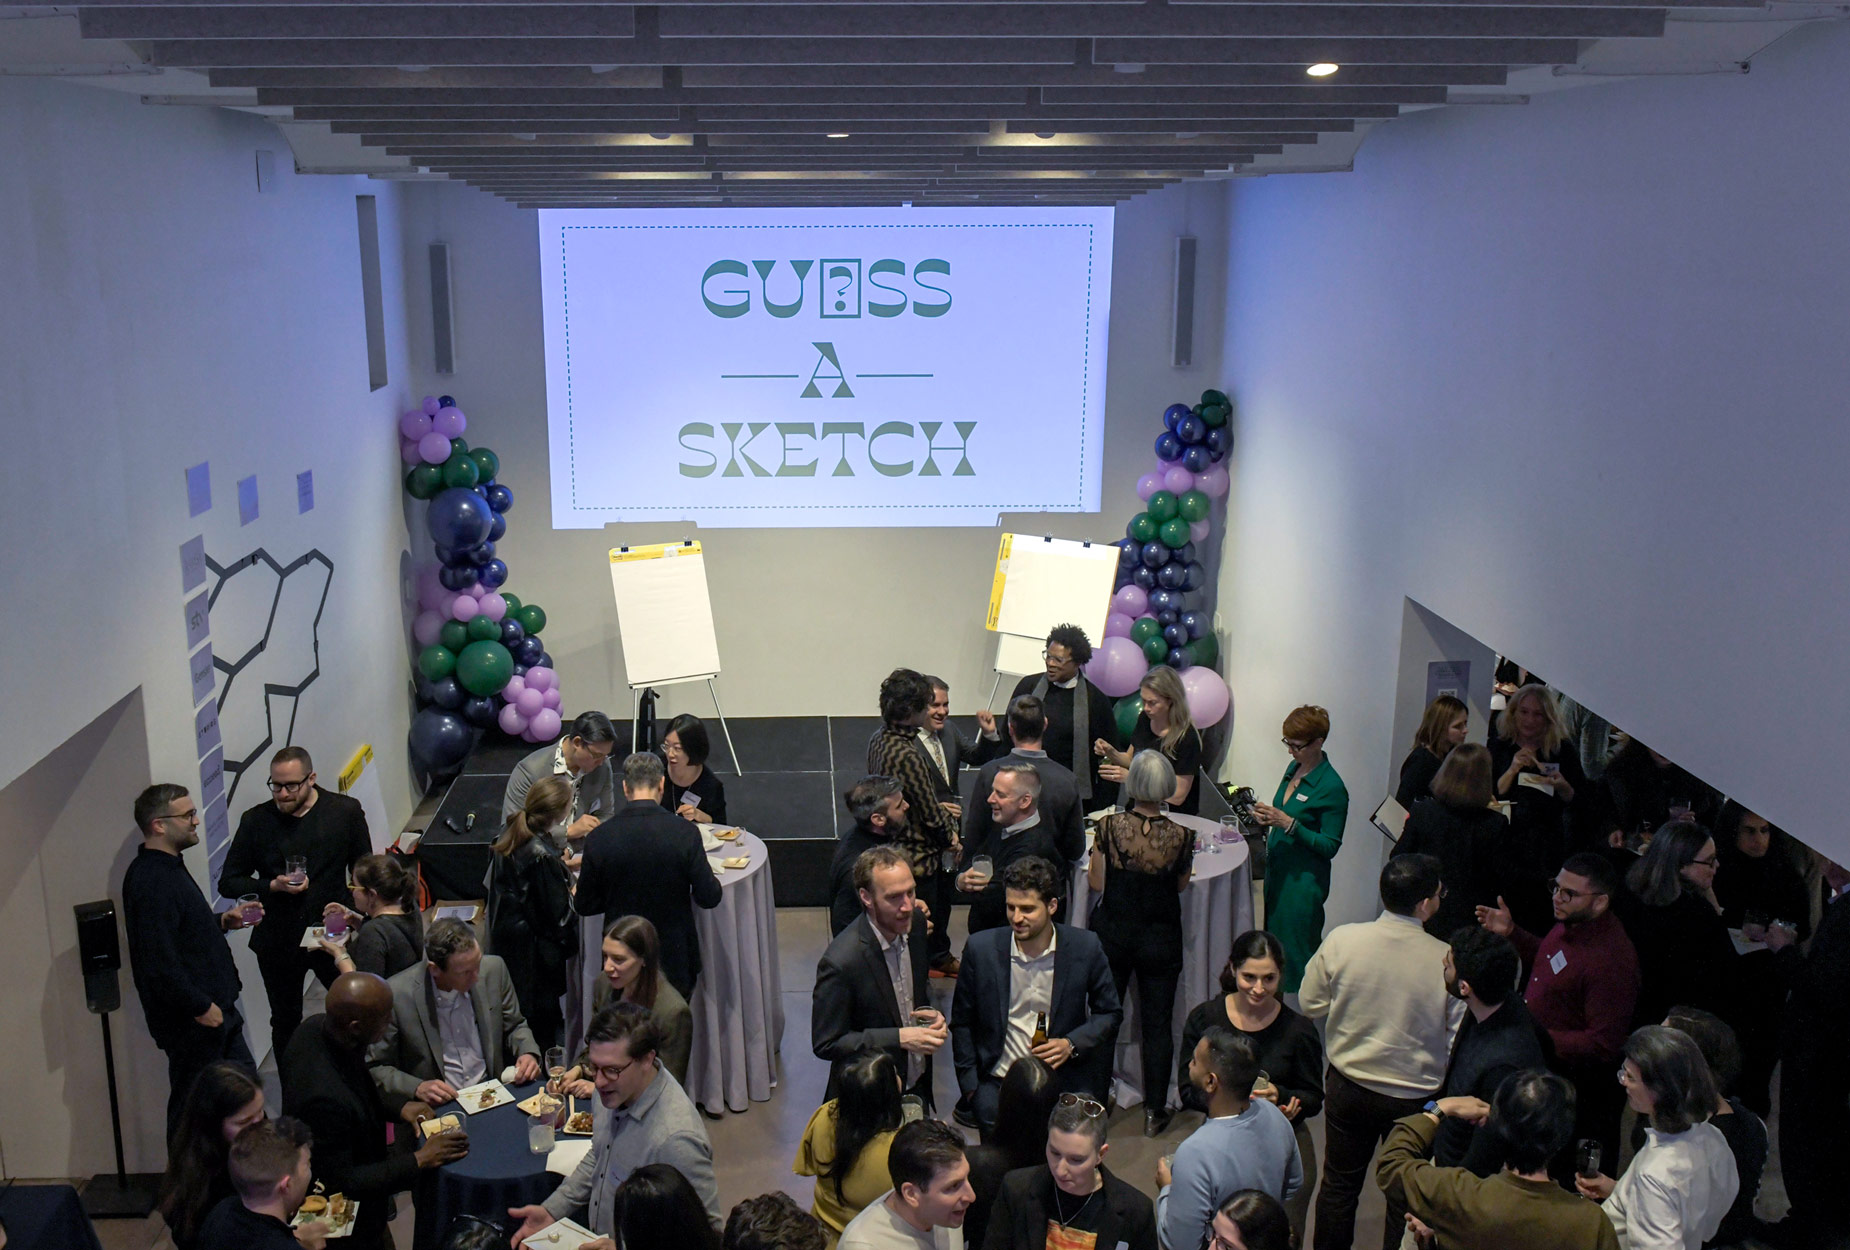 View of Guess-A-Sketch event space from above